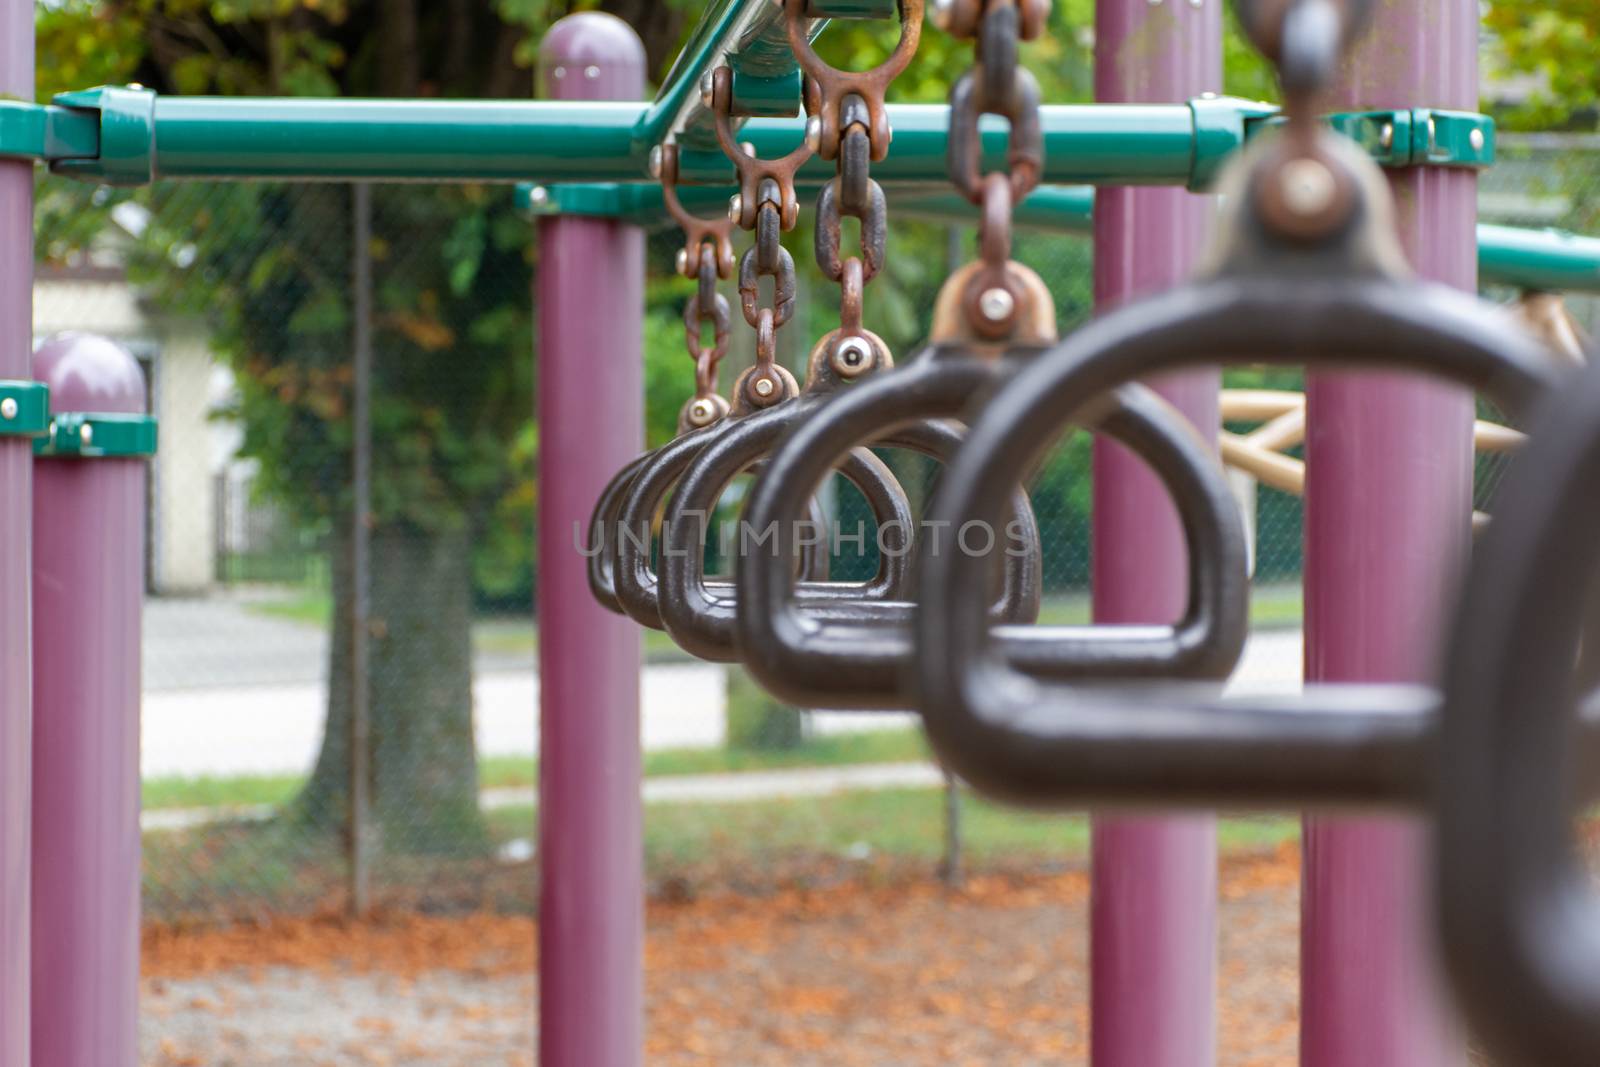 Empty monkey bars at a playground side view concept looking thro by kingmaphotos